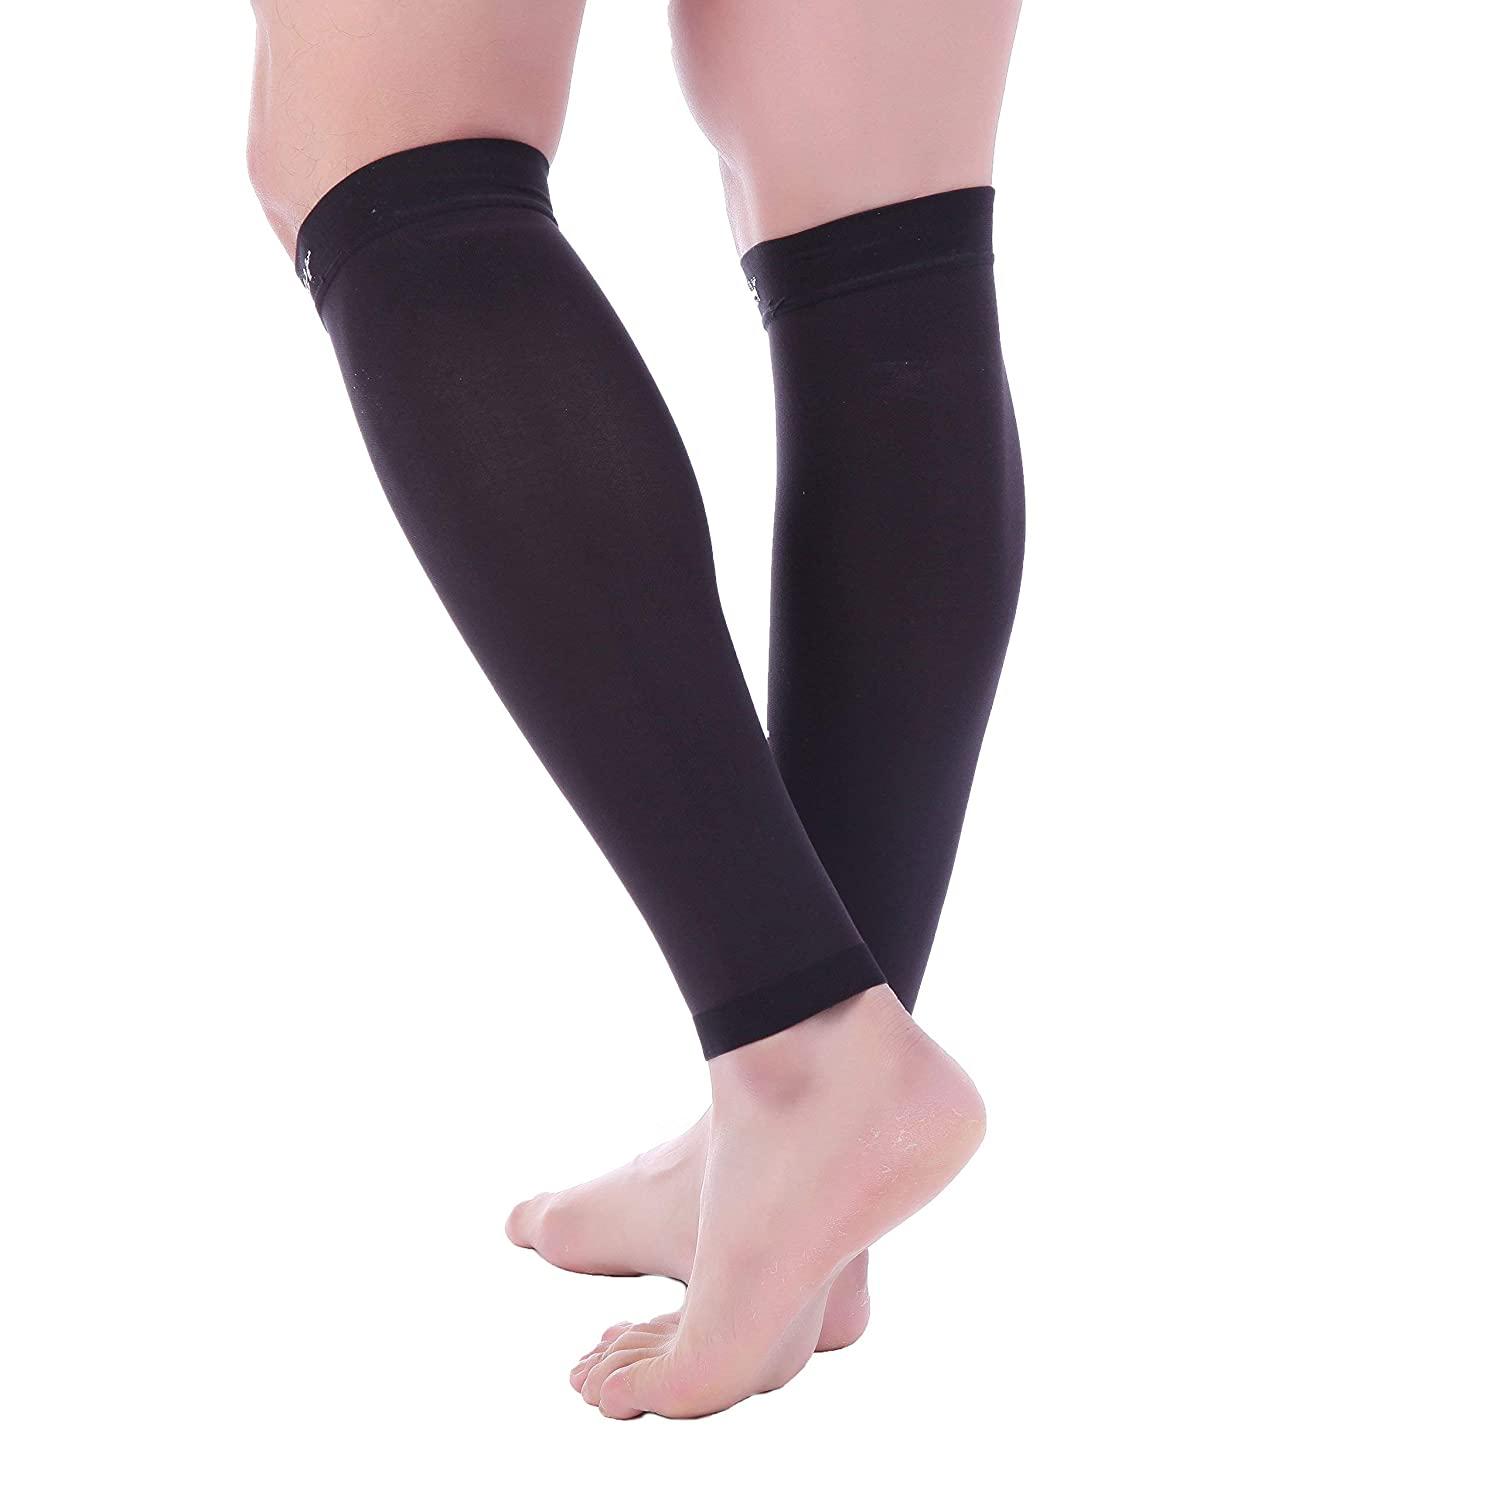 Doc Miller Petite Calf Compression Sleeve for Short People Men and Women -  15-20mmHg Shin Splint Compression Sleeve Recover Varicose Veins Torn Calf  and Pain Relief - 1 Pair Calf Sleeves Beige